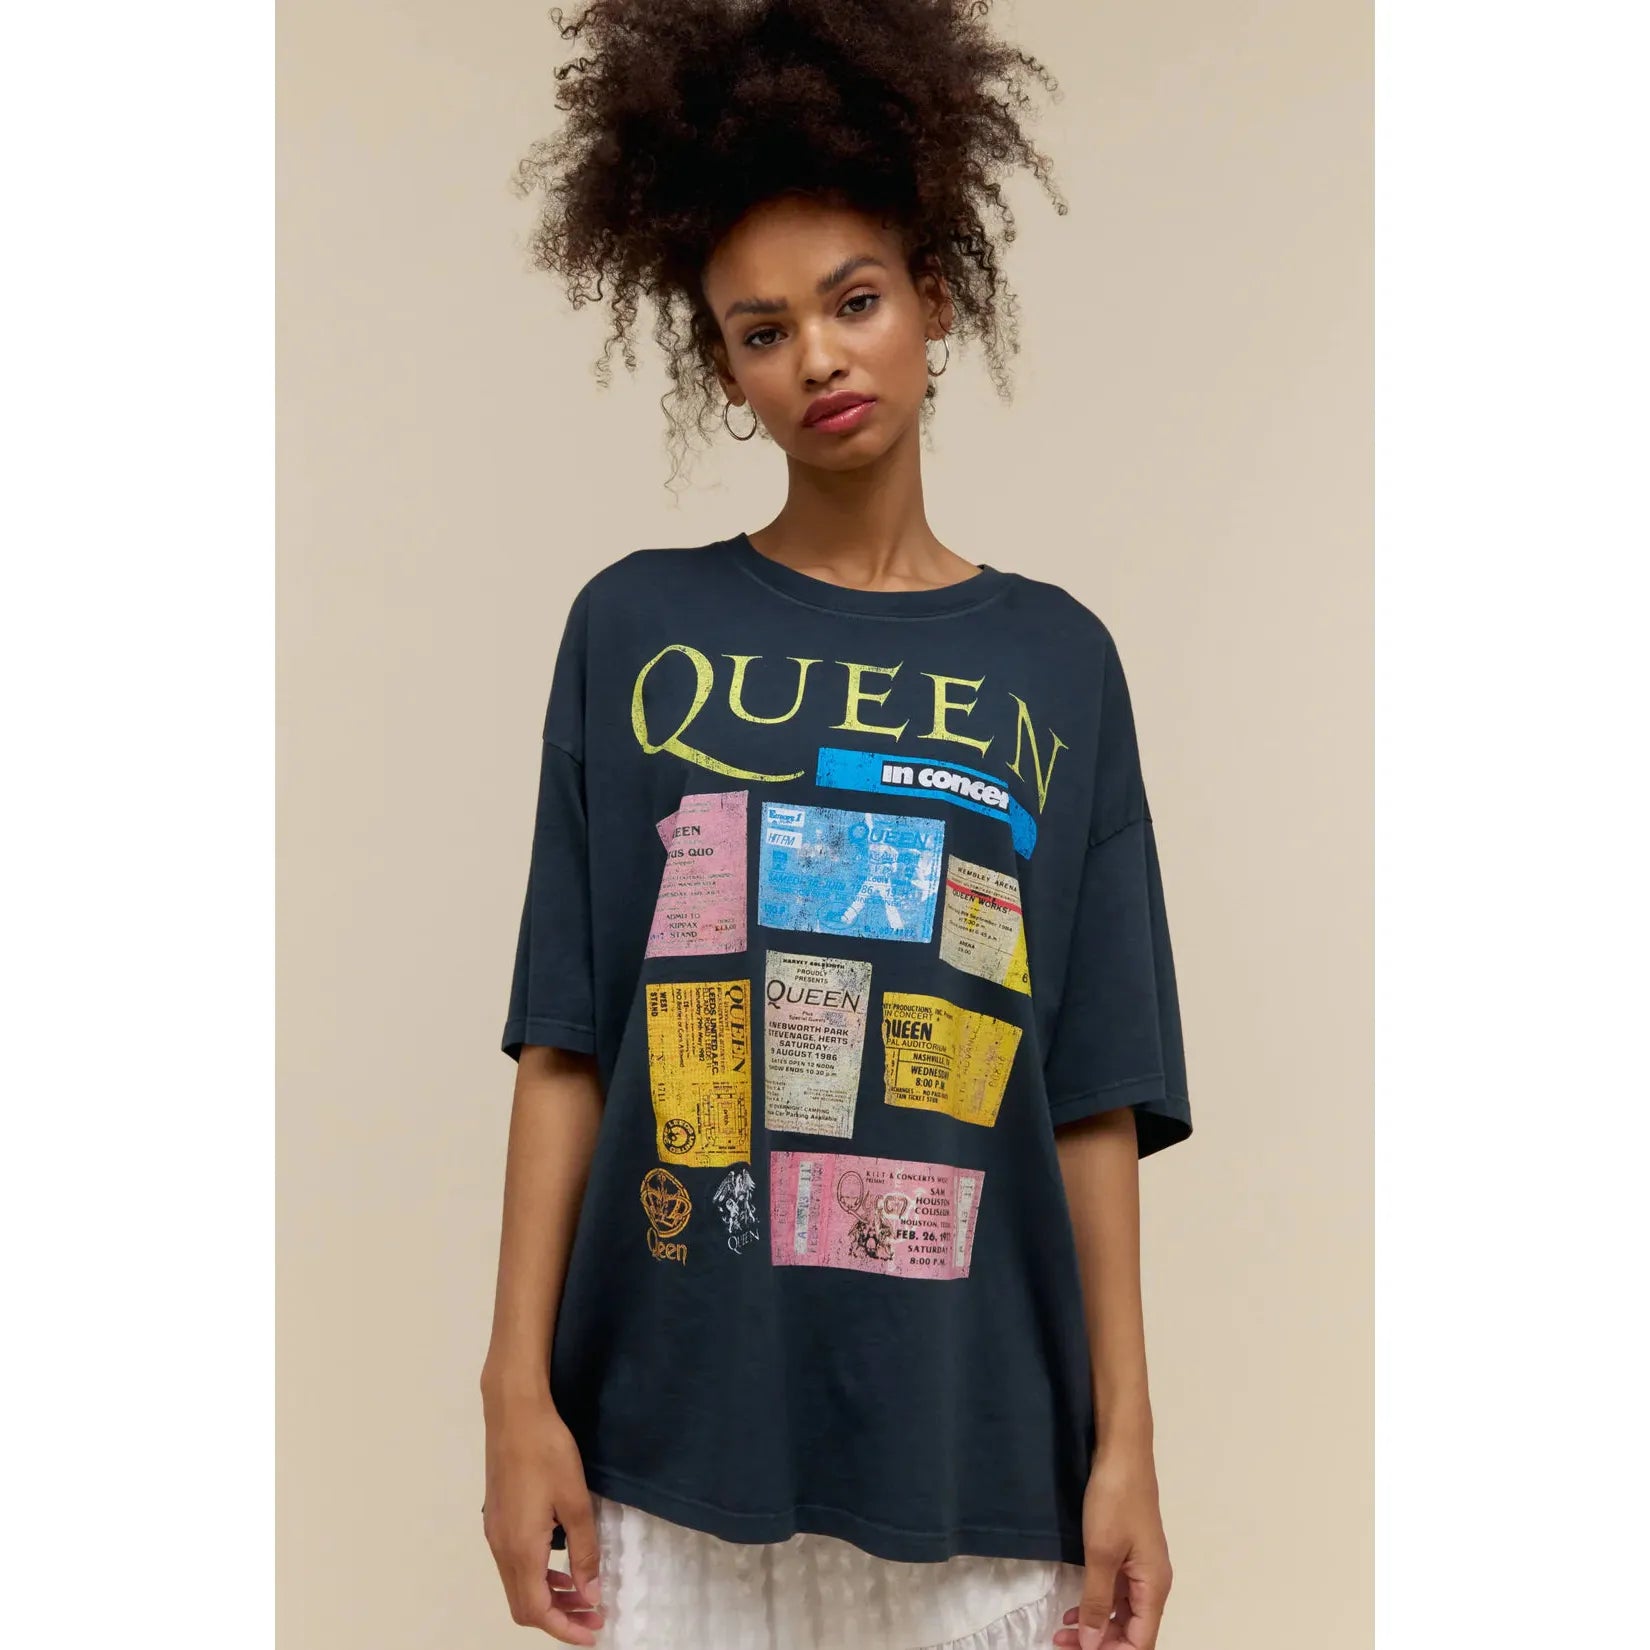 Daydreamer - Queen Ticket Collage One Size Tee in Vintage Black